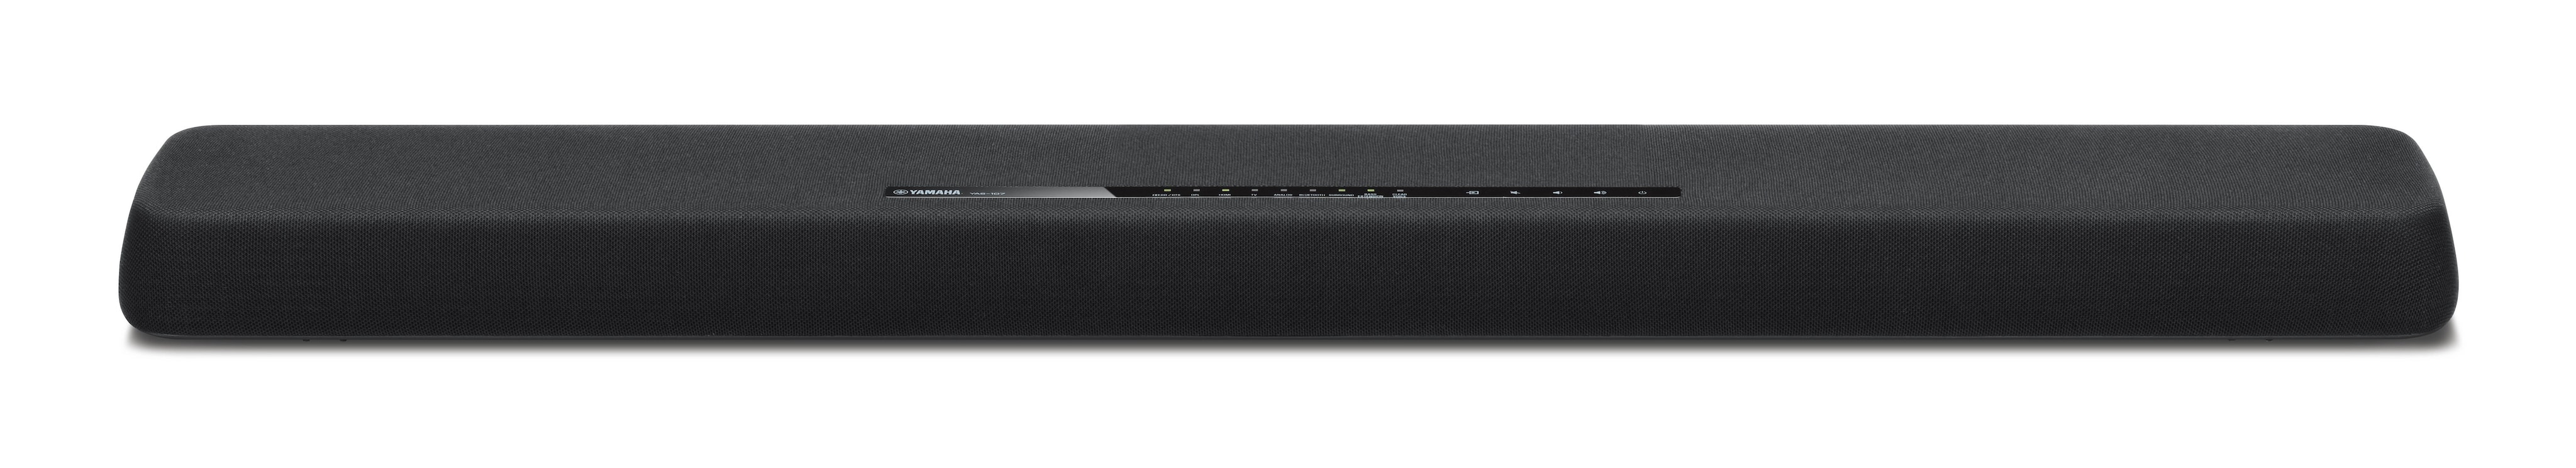 YAS-107 - Overview - Sound Bar - Audio & Visual - Products 